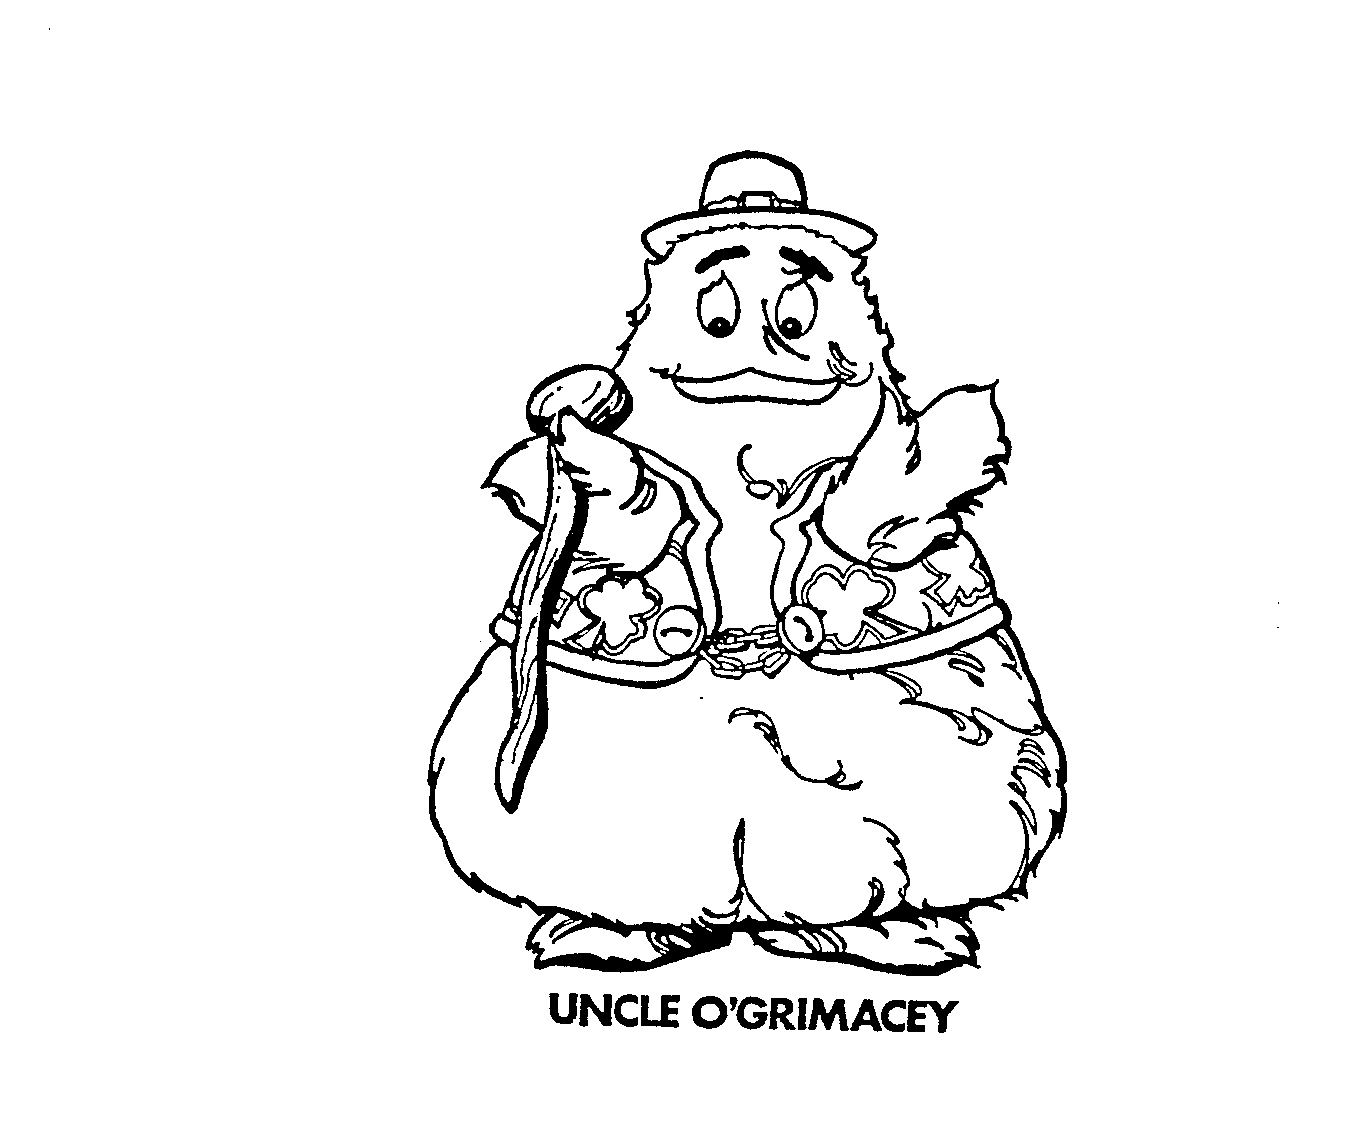  UNCLE O'GRIMACEY